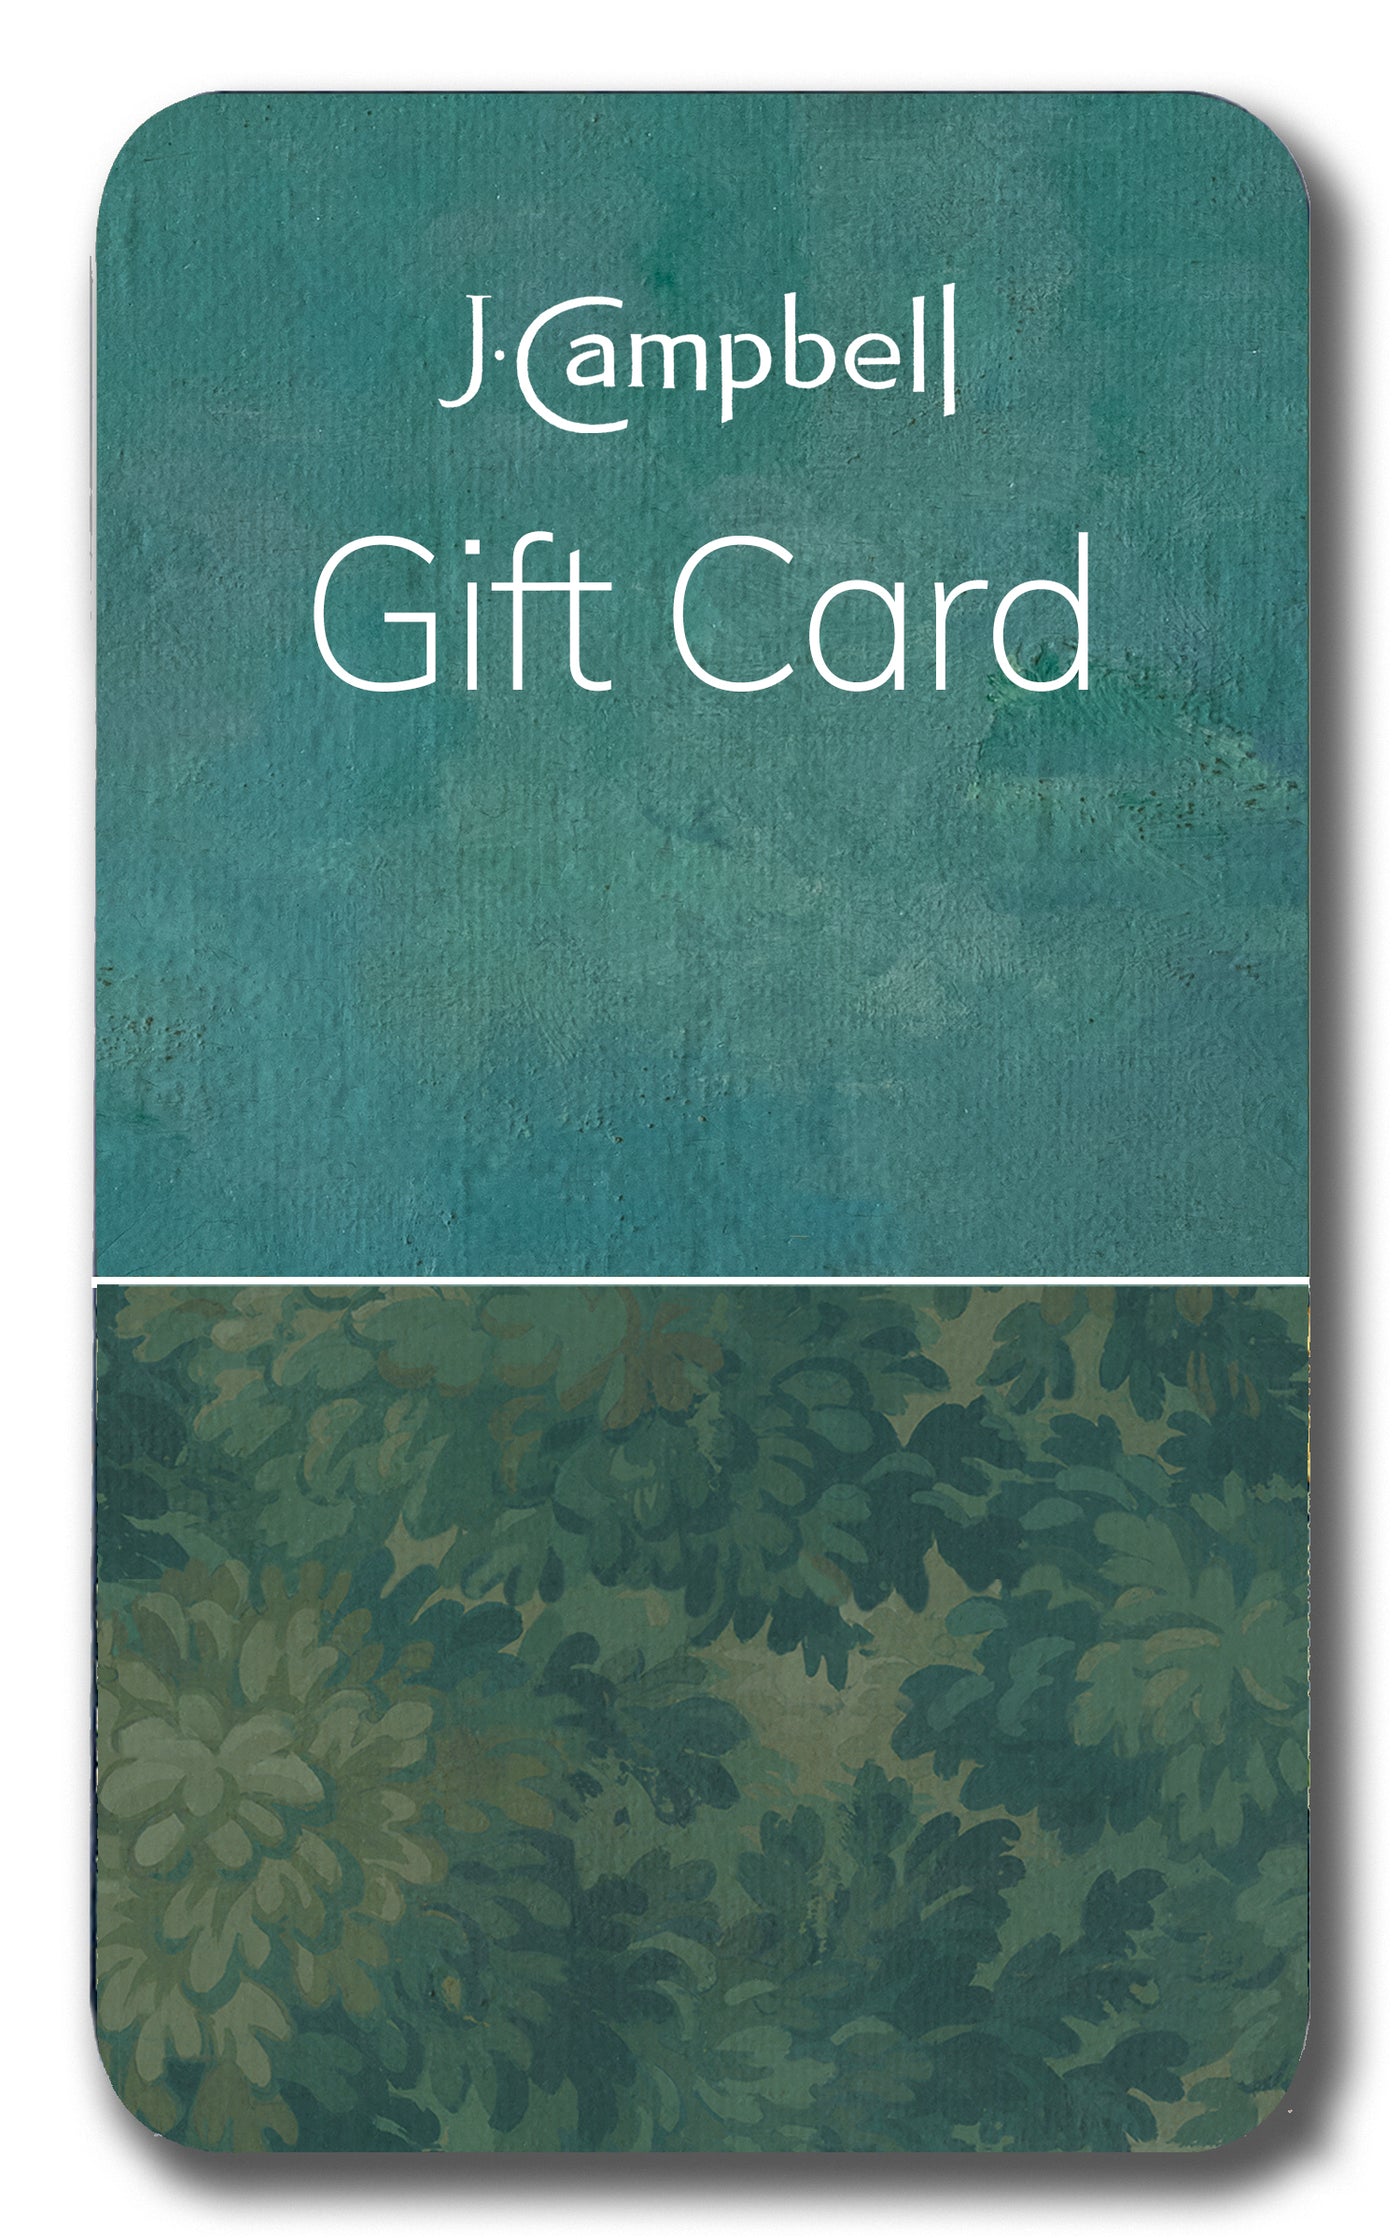 JCampbell Gift Card